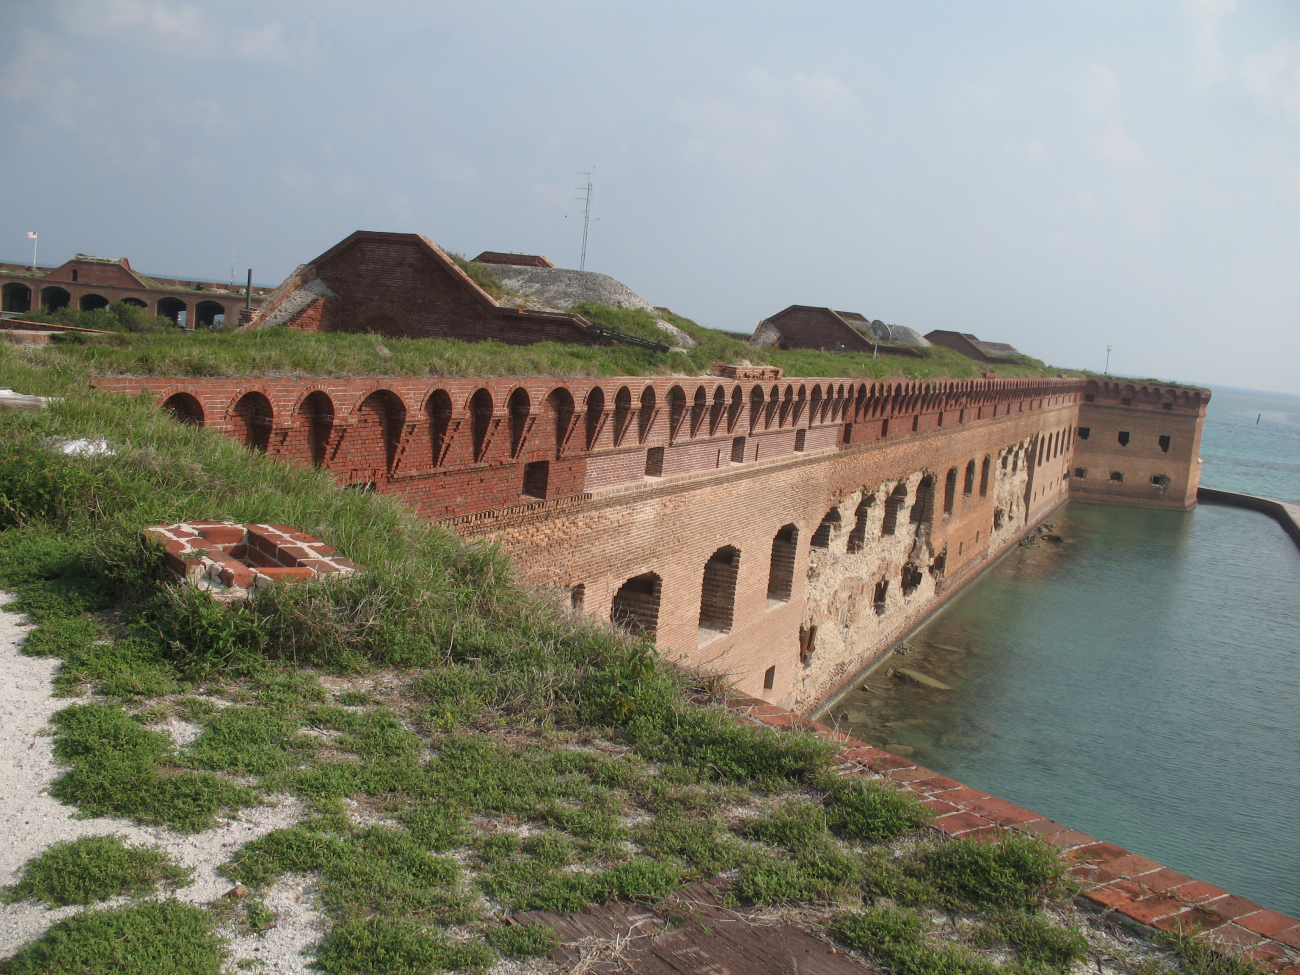 An outer wall of Fort Jefferson